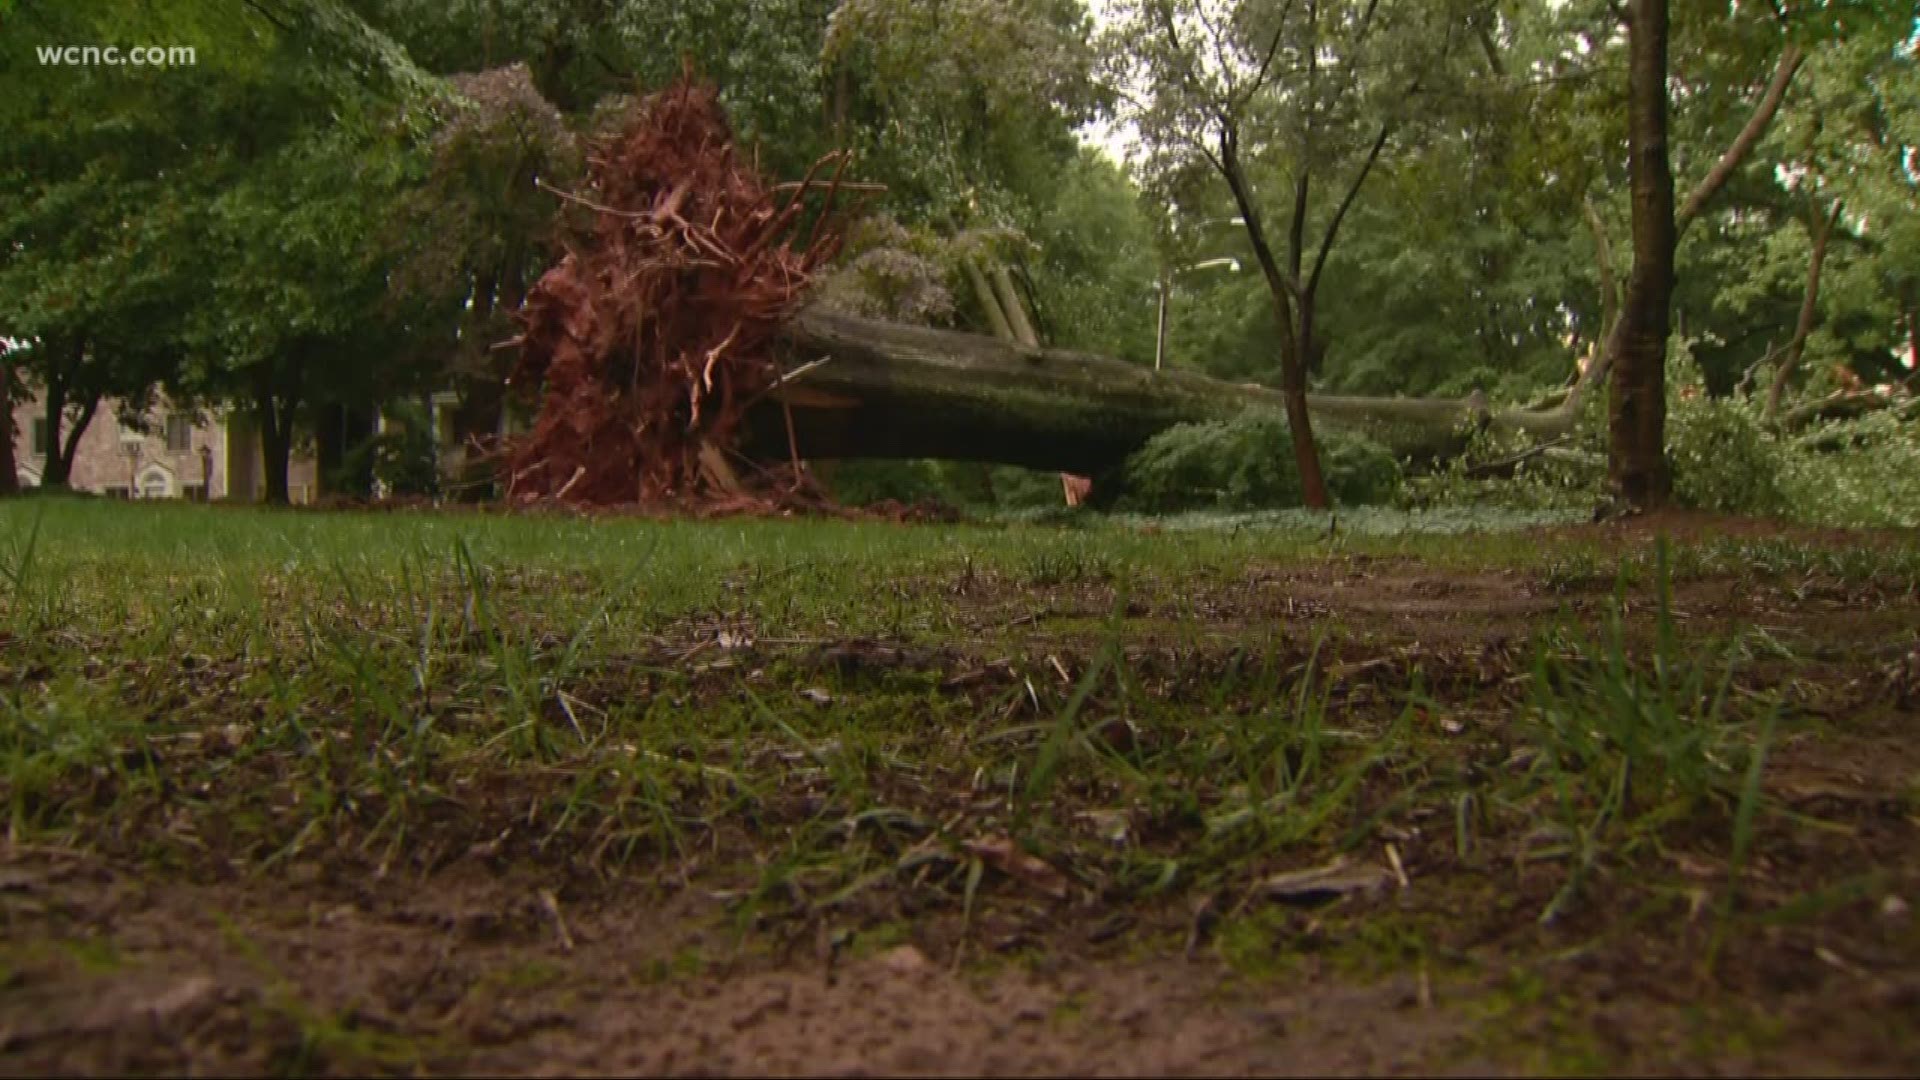 Cleanup is now underway after storms tore down tons of trees and power lines in Charlotte.